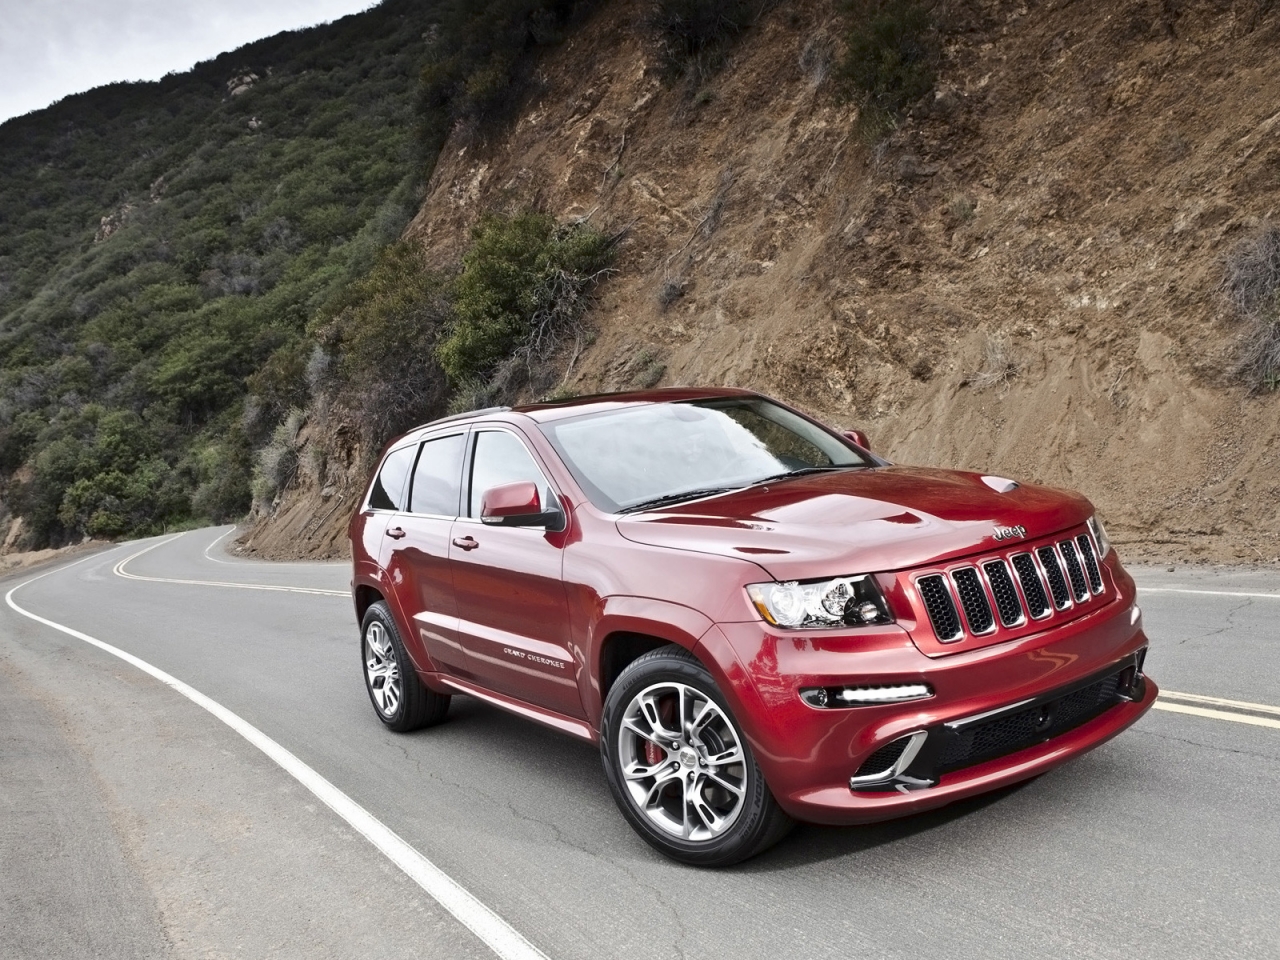 2012 Jeep Grand Cherokee SRT8 Speed for 1280 x 960 resolution